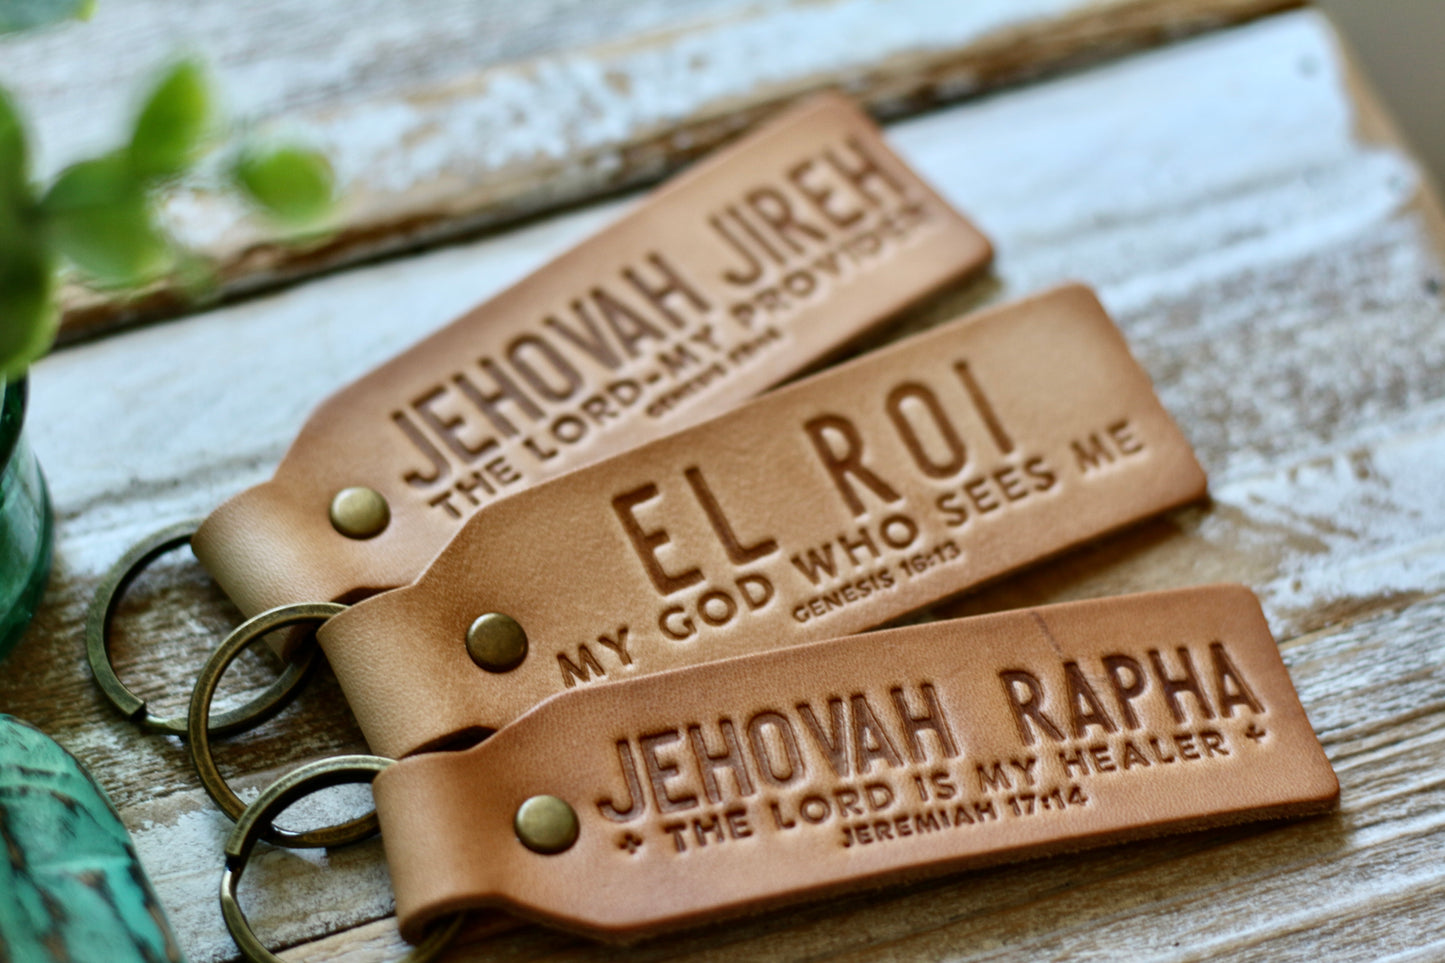 Jehovah Rapha - the Lord is my healer {Jeremiah 17:14} leather keyring (camel/natural)